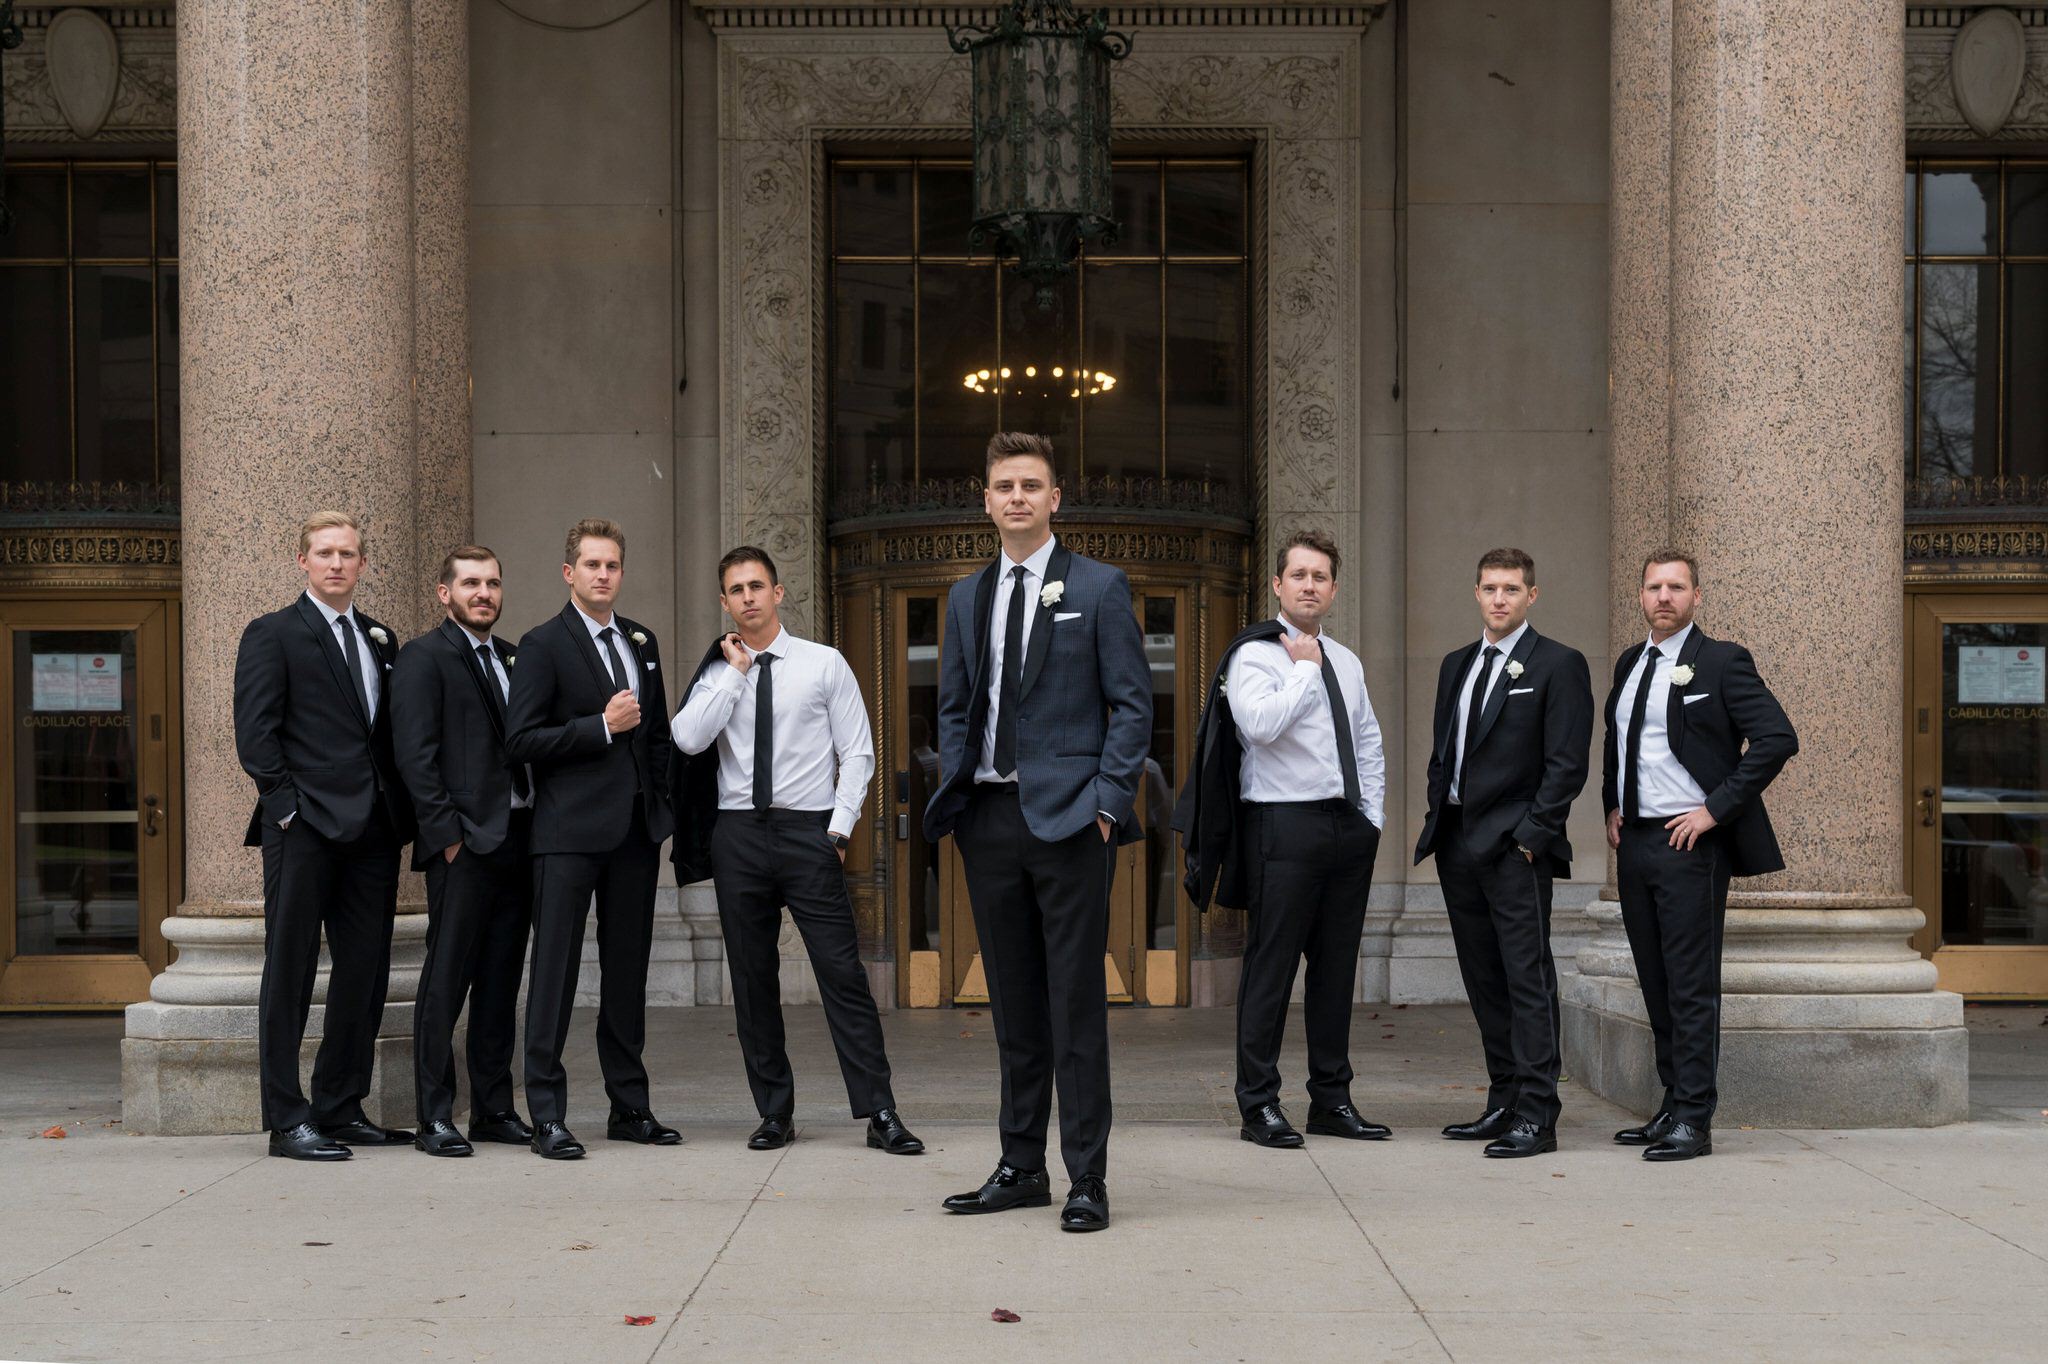 Groomsmen casually pose in front of the Cadillac Place apartments in Detroit, MI.   